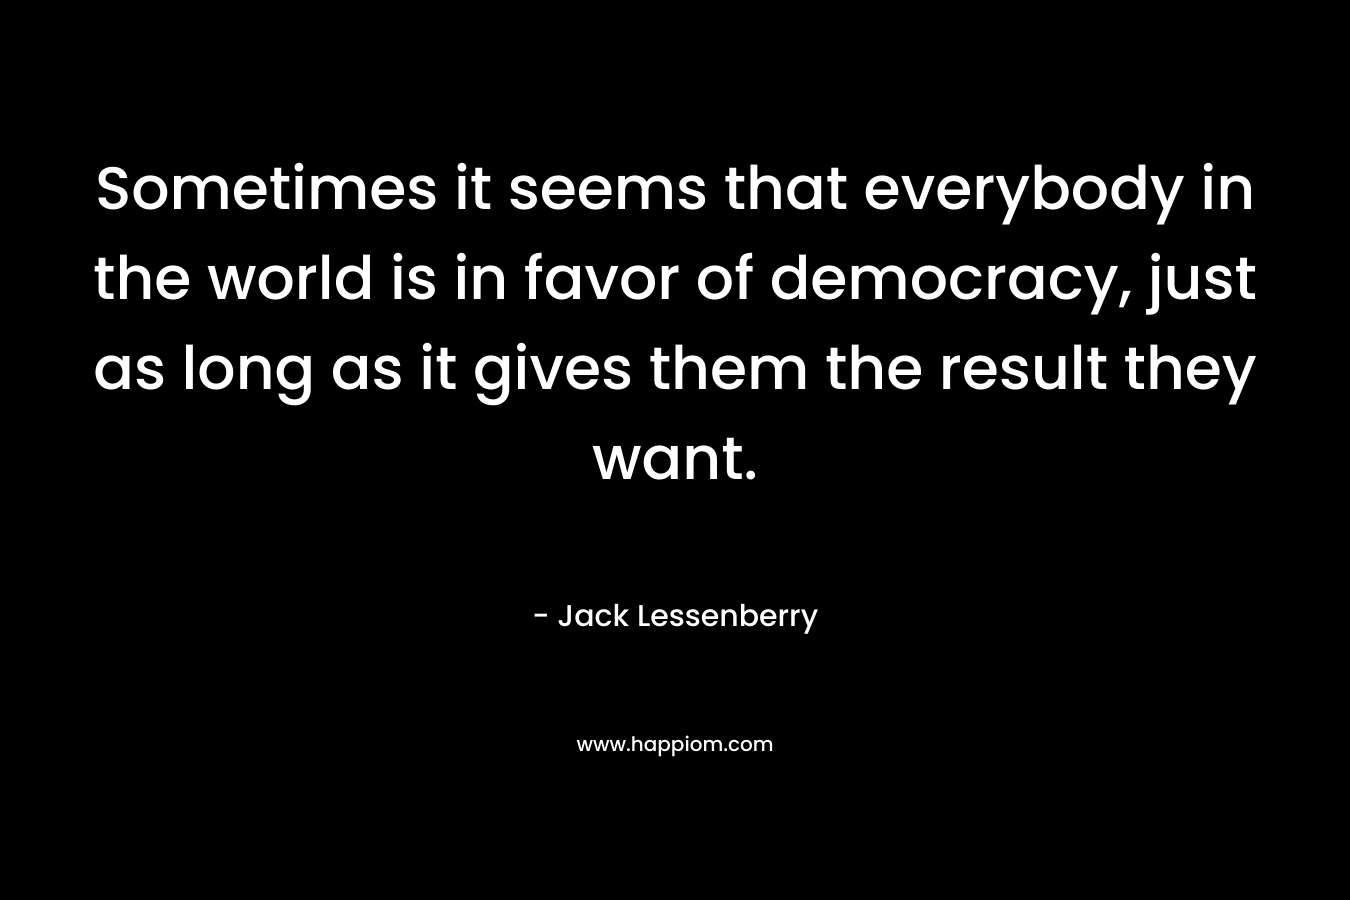 Sometimes it seems that everybody in the world is in favor of democracy, just as long as it gives them the result they want.